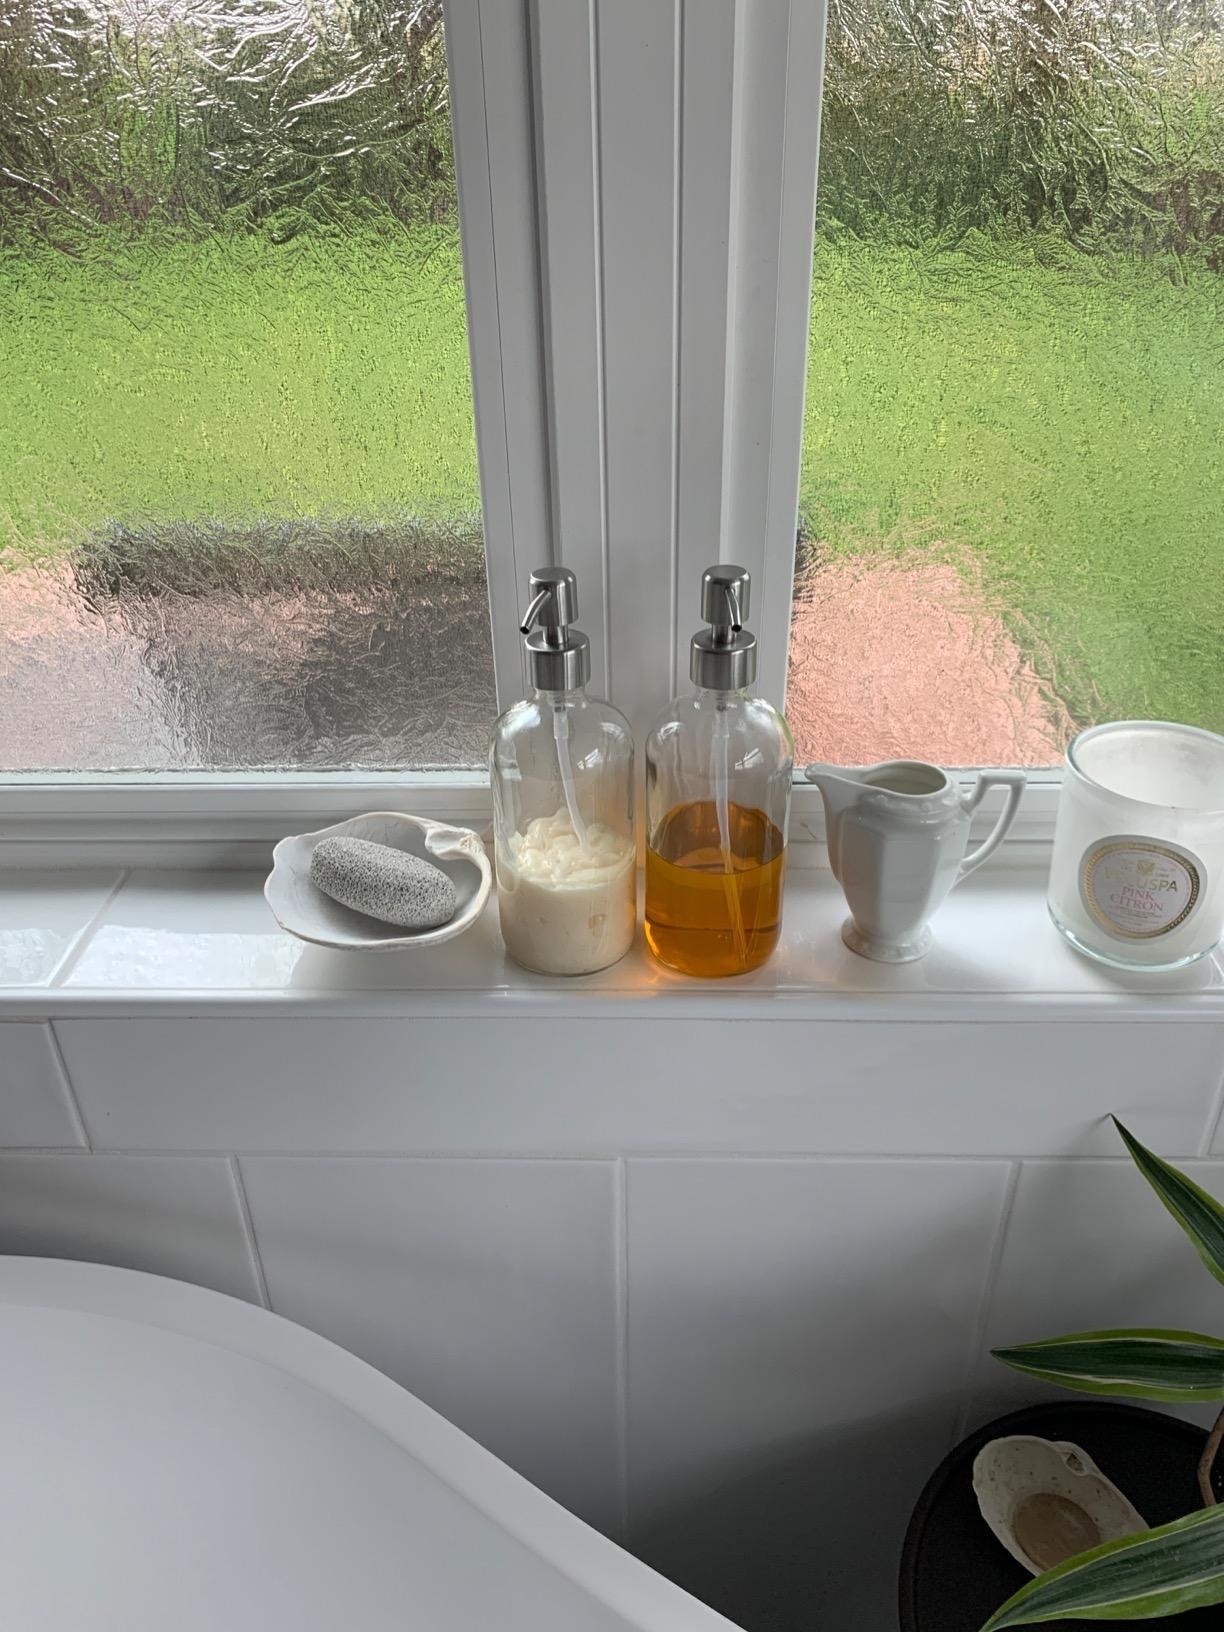 The soap dispensers are shown on a window sill